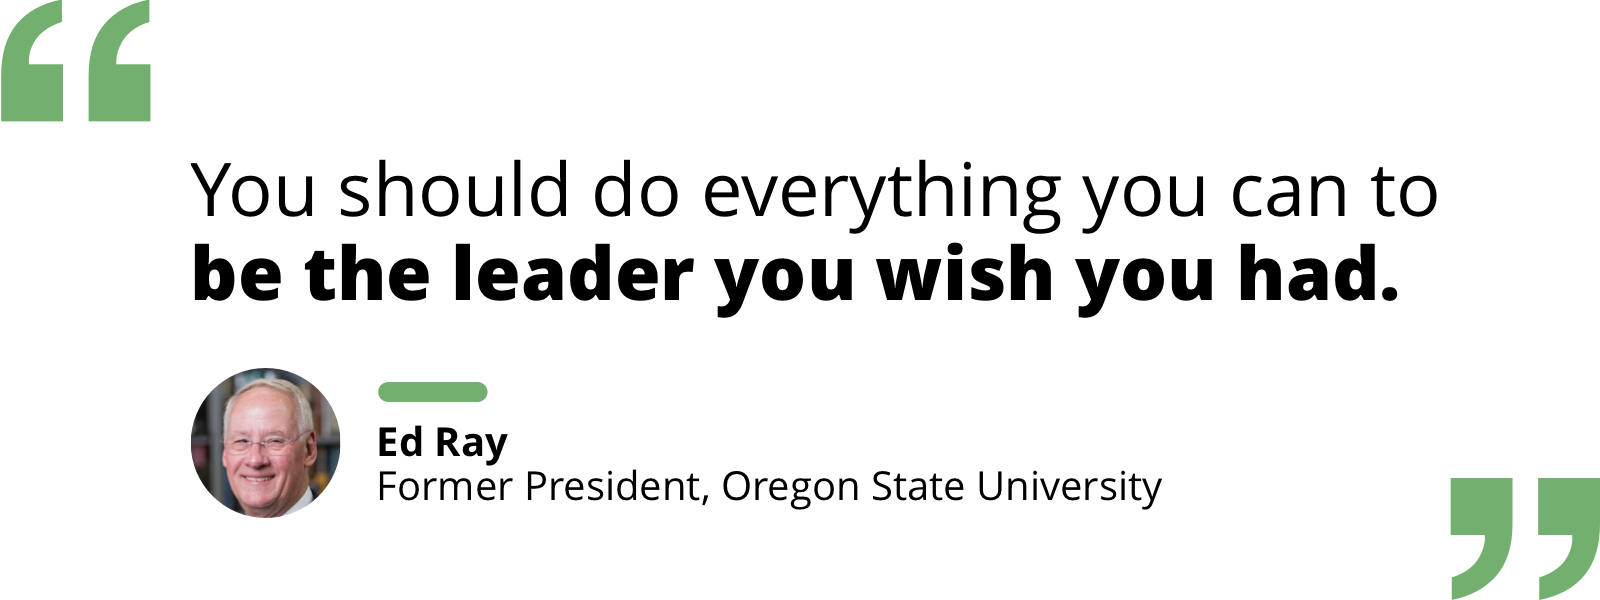 Quote by Ed Ray: "You should do everything you can to be the leader you wish you had."